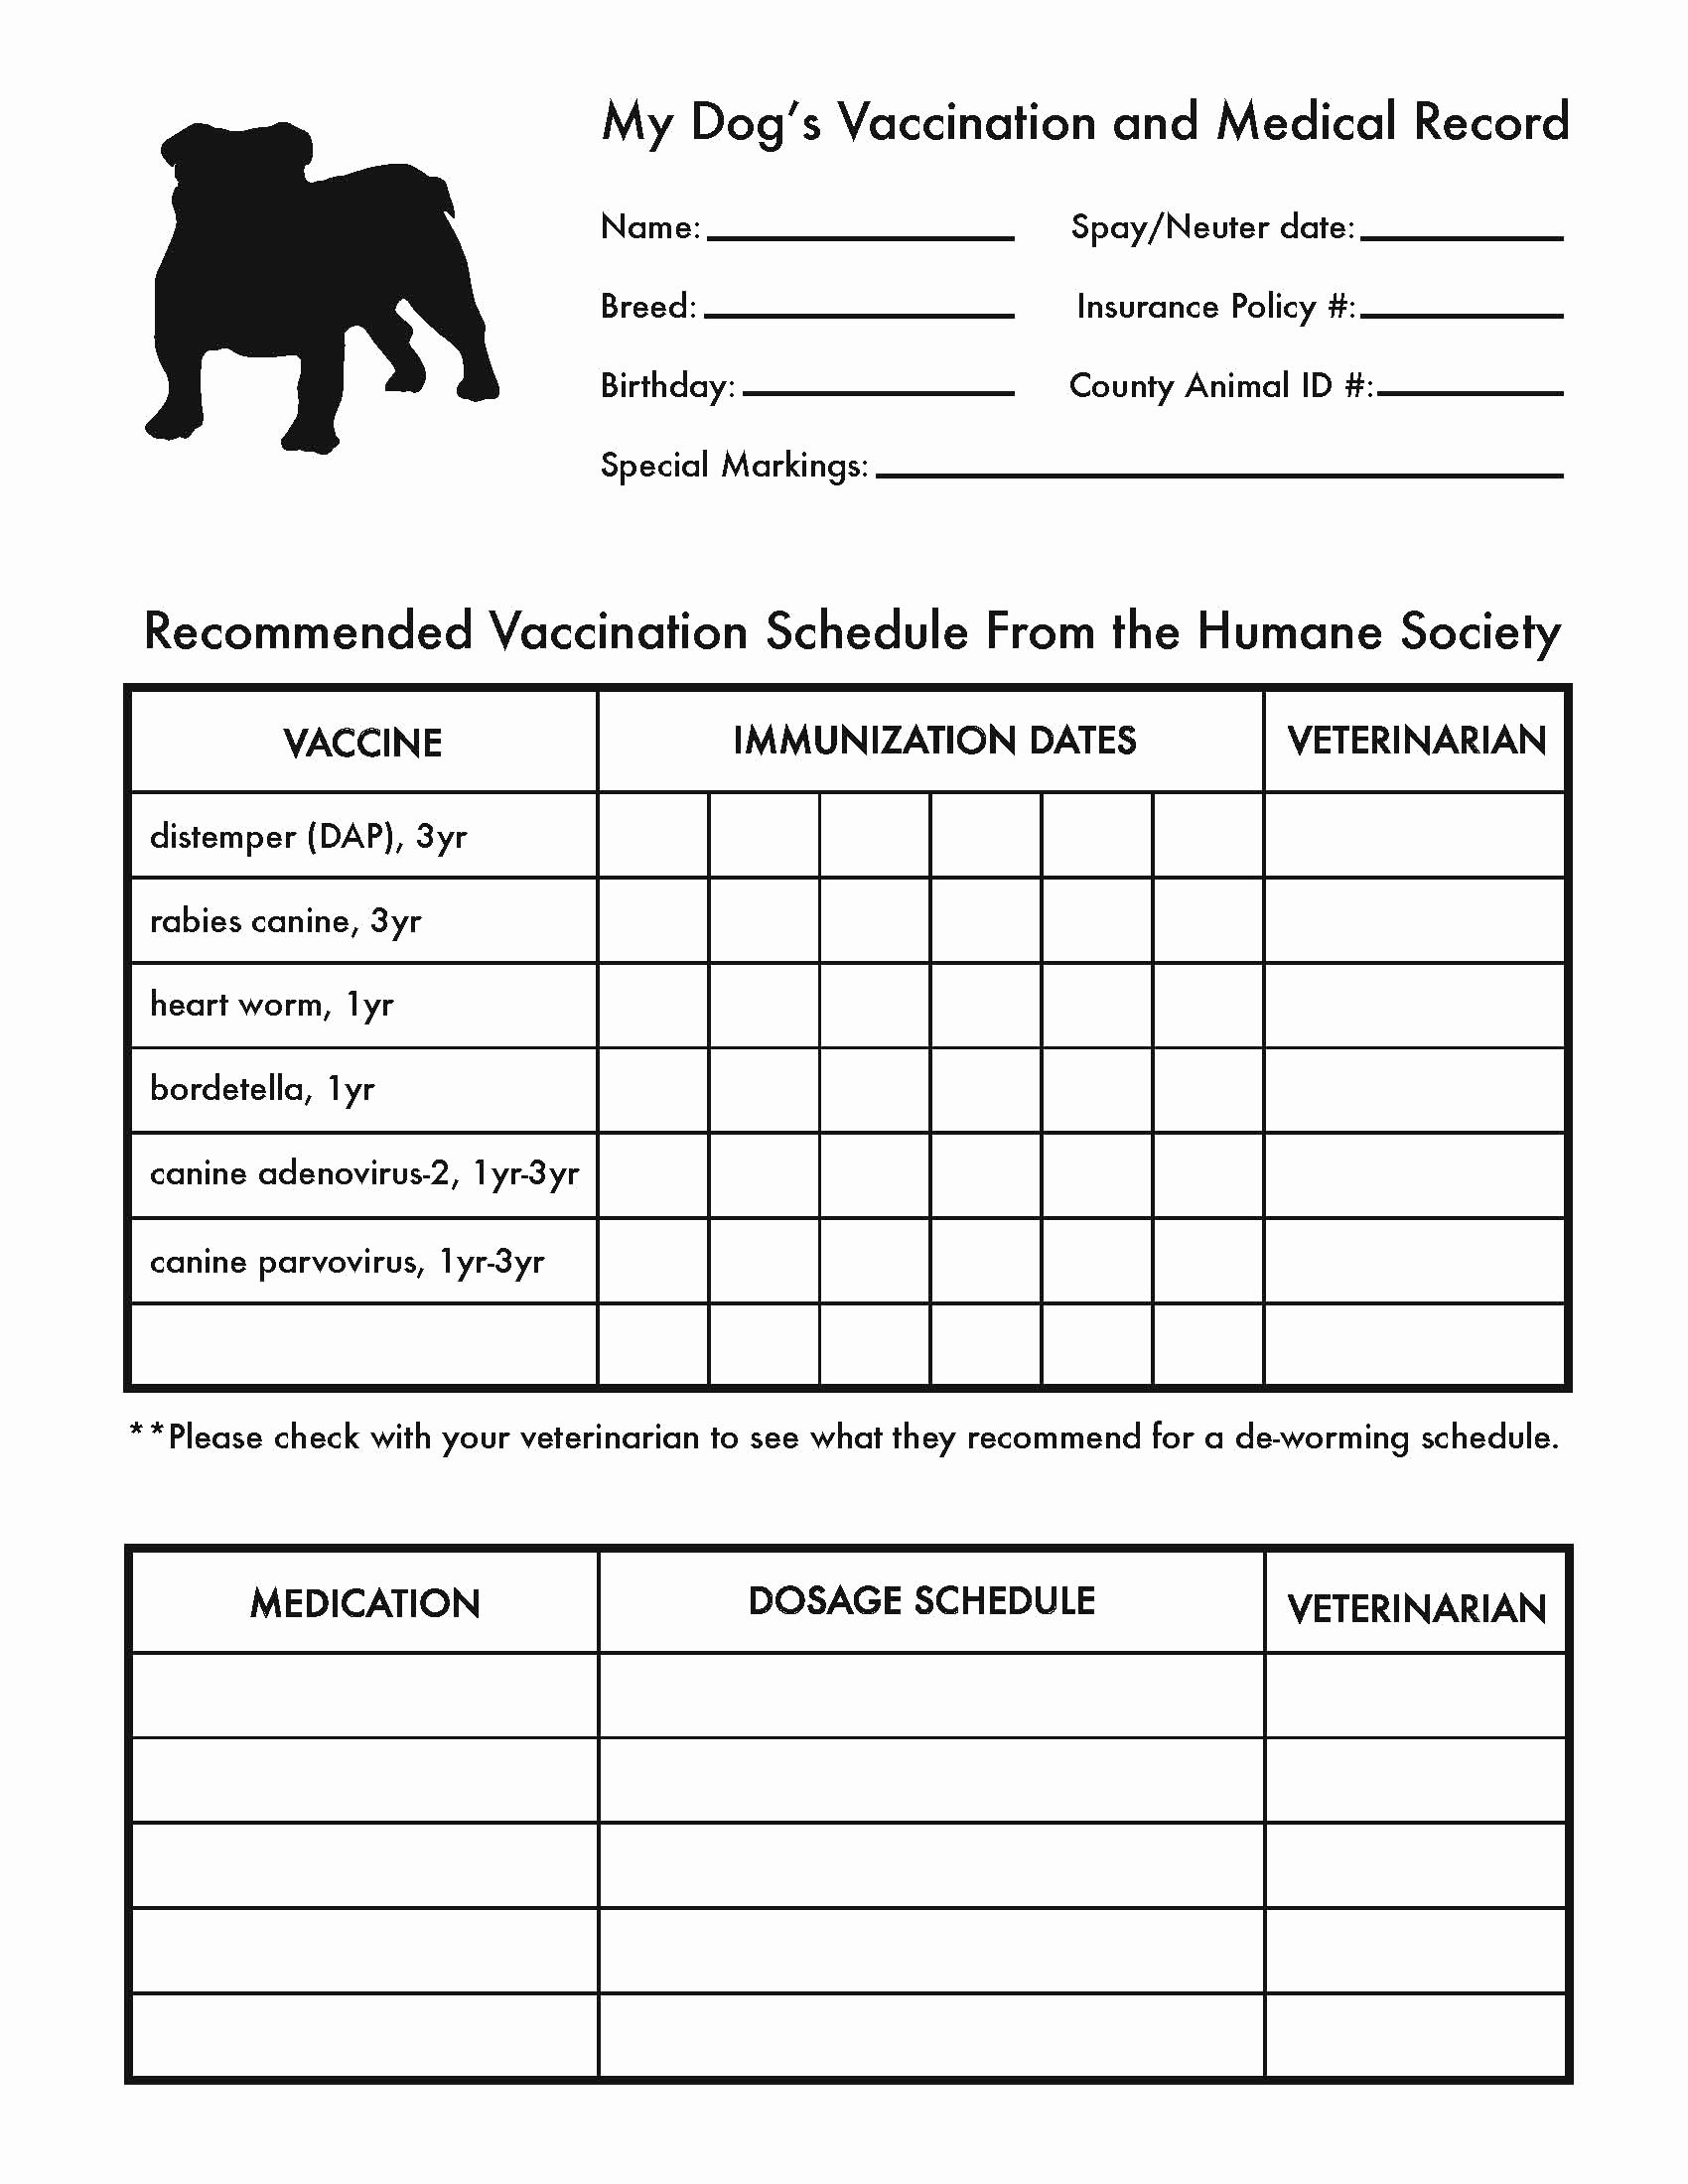 Dog Vaccination Record Template Lovely are Your Pet’s Medical Records organized